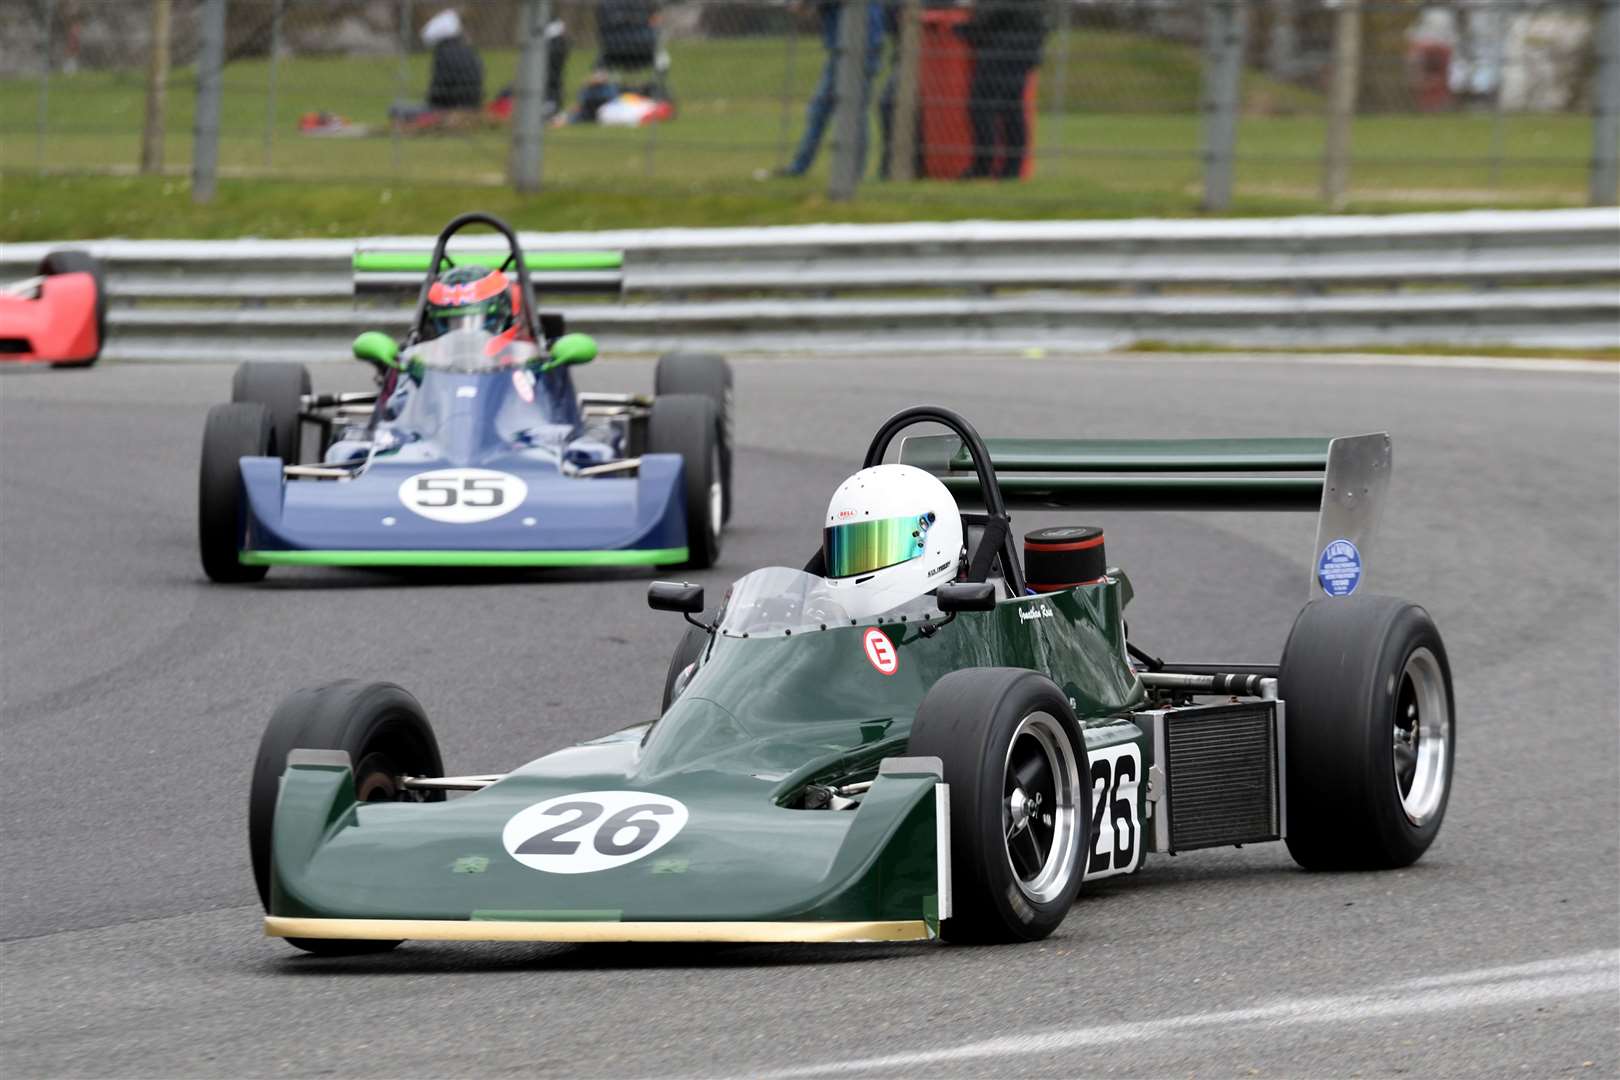 Jonathan Rose, from Hawkhurst, finished 15th and 24th in his 1979 Reynard SF79 in the two Historic Formula Ford 2000 races